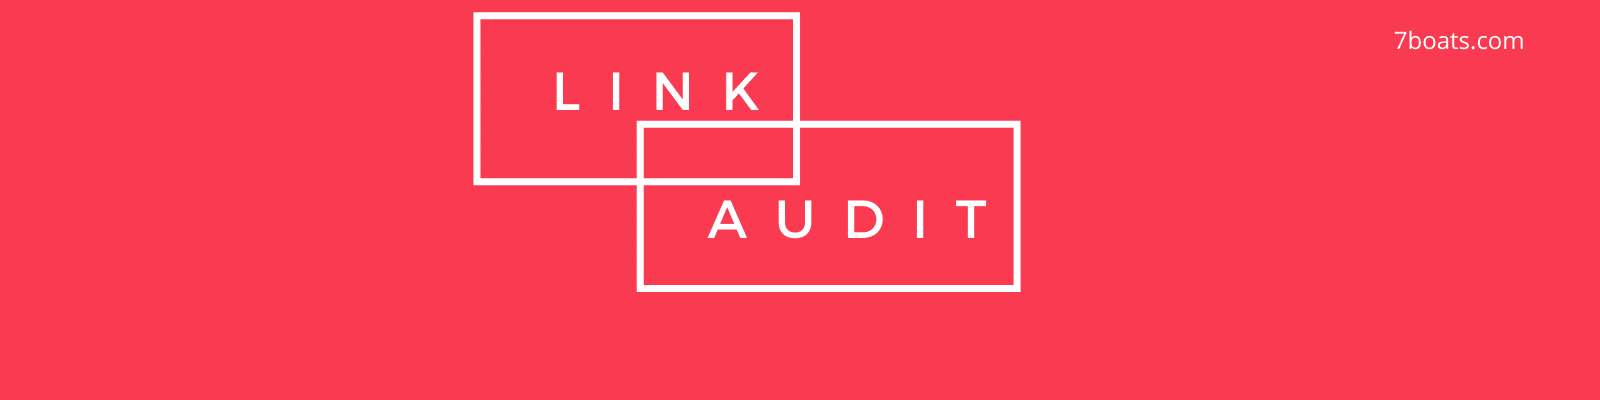 Link Auditing Tips by 7boats